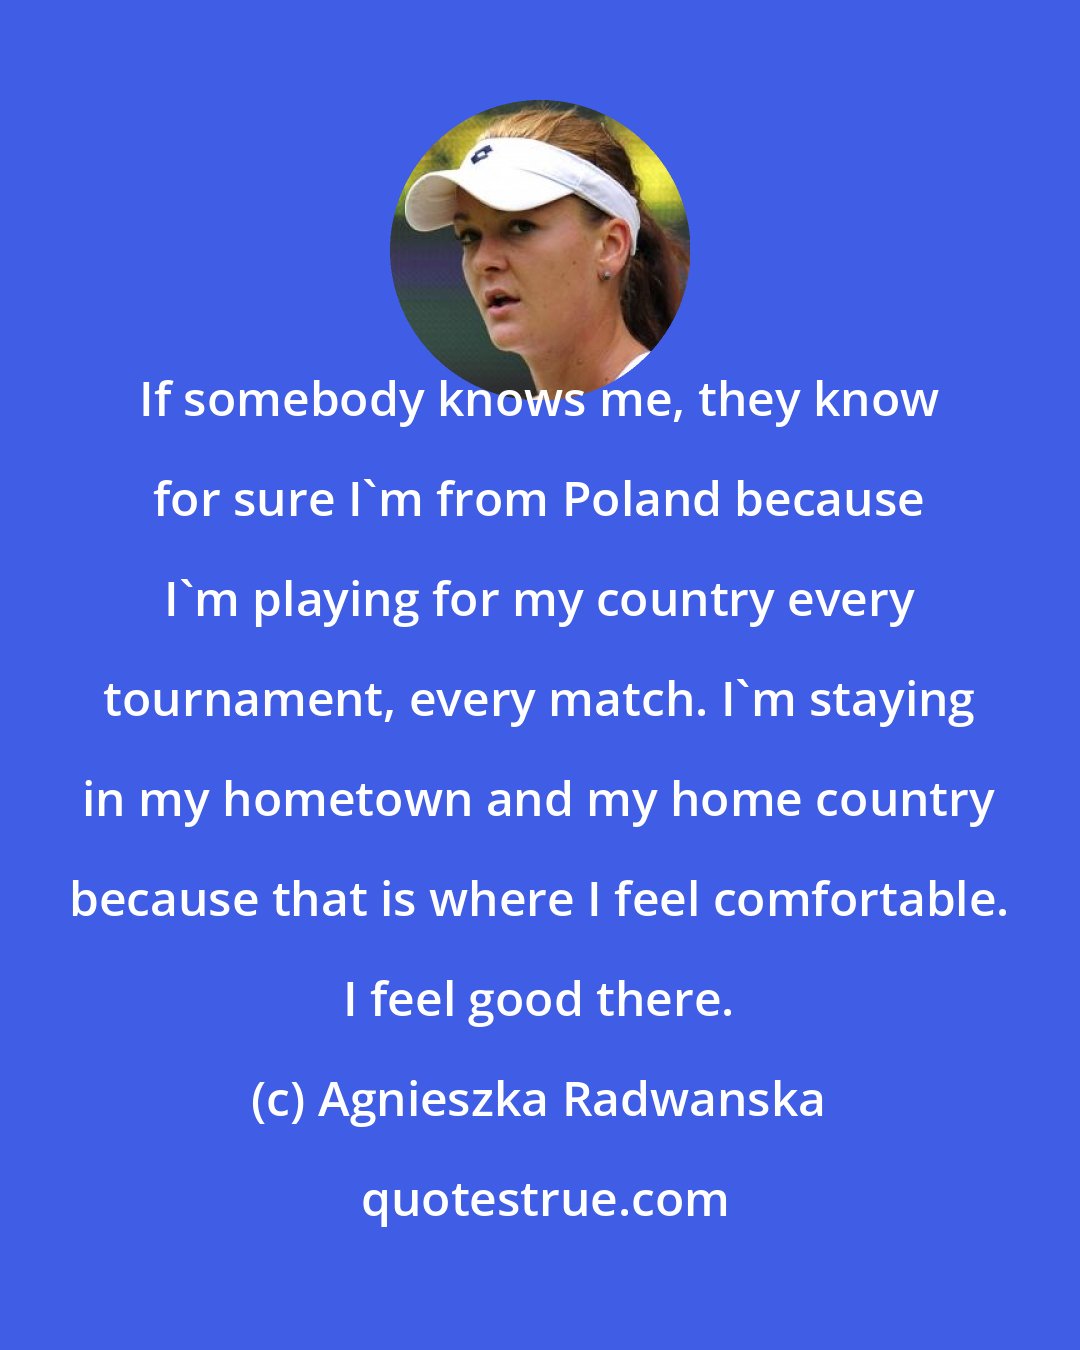 Agnieszka Radwanska: If somebody knows me, they know for sure I'm from Poland because I'm playing for my country every tournament, every match. I'm staying in my hometown and my home country because that is where I feel comfortable. I feel good there.